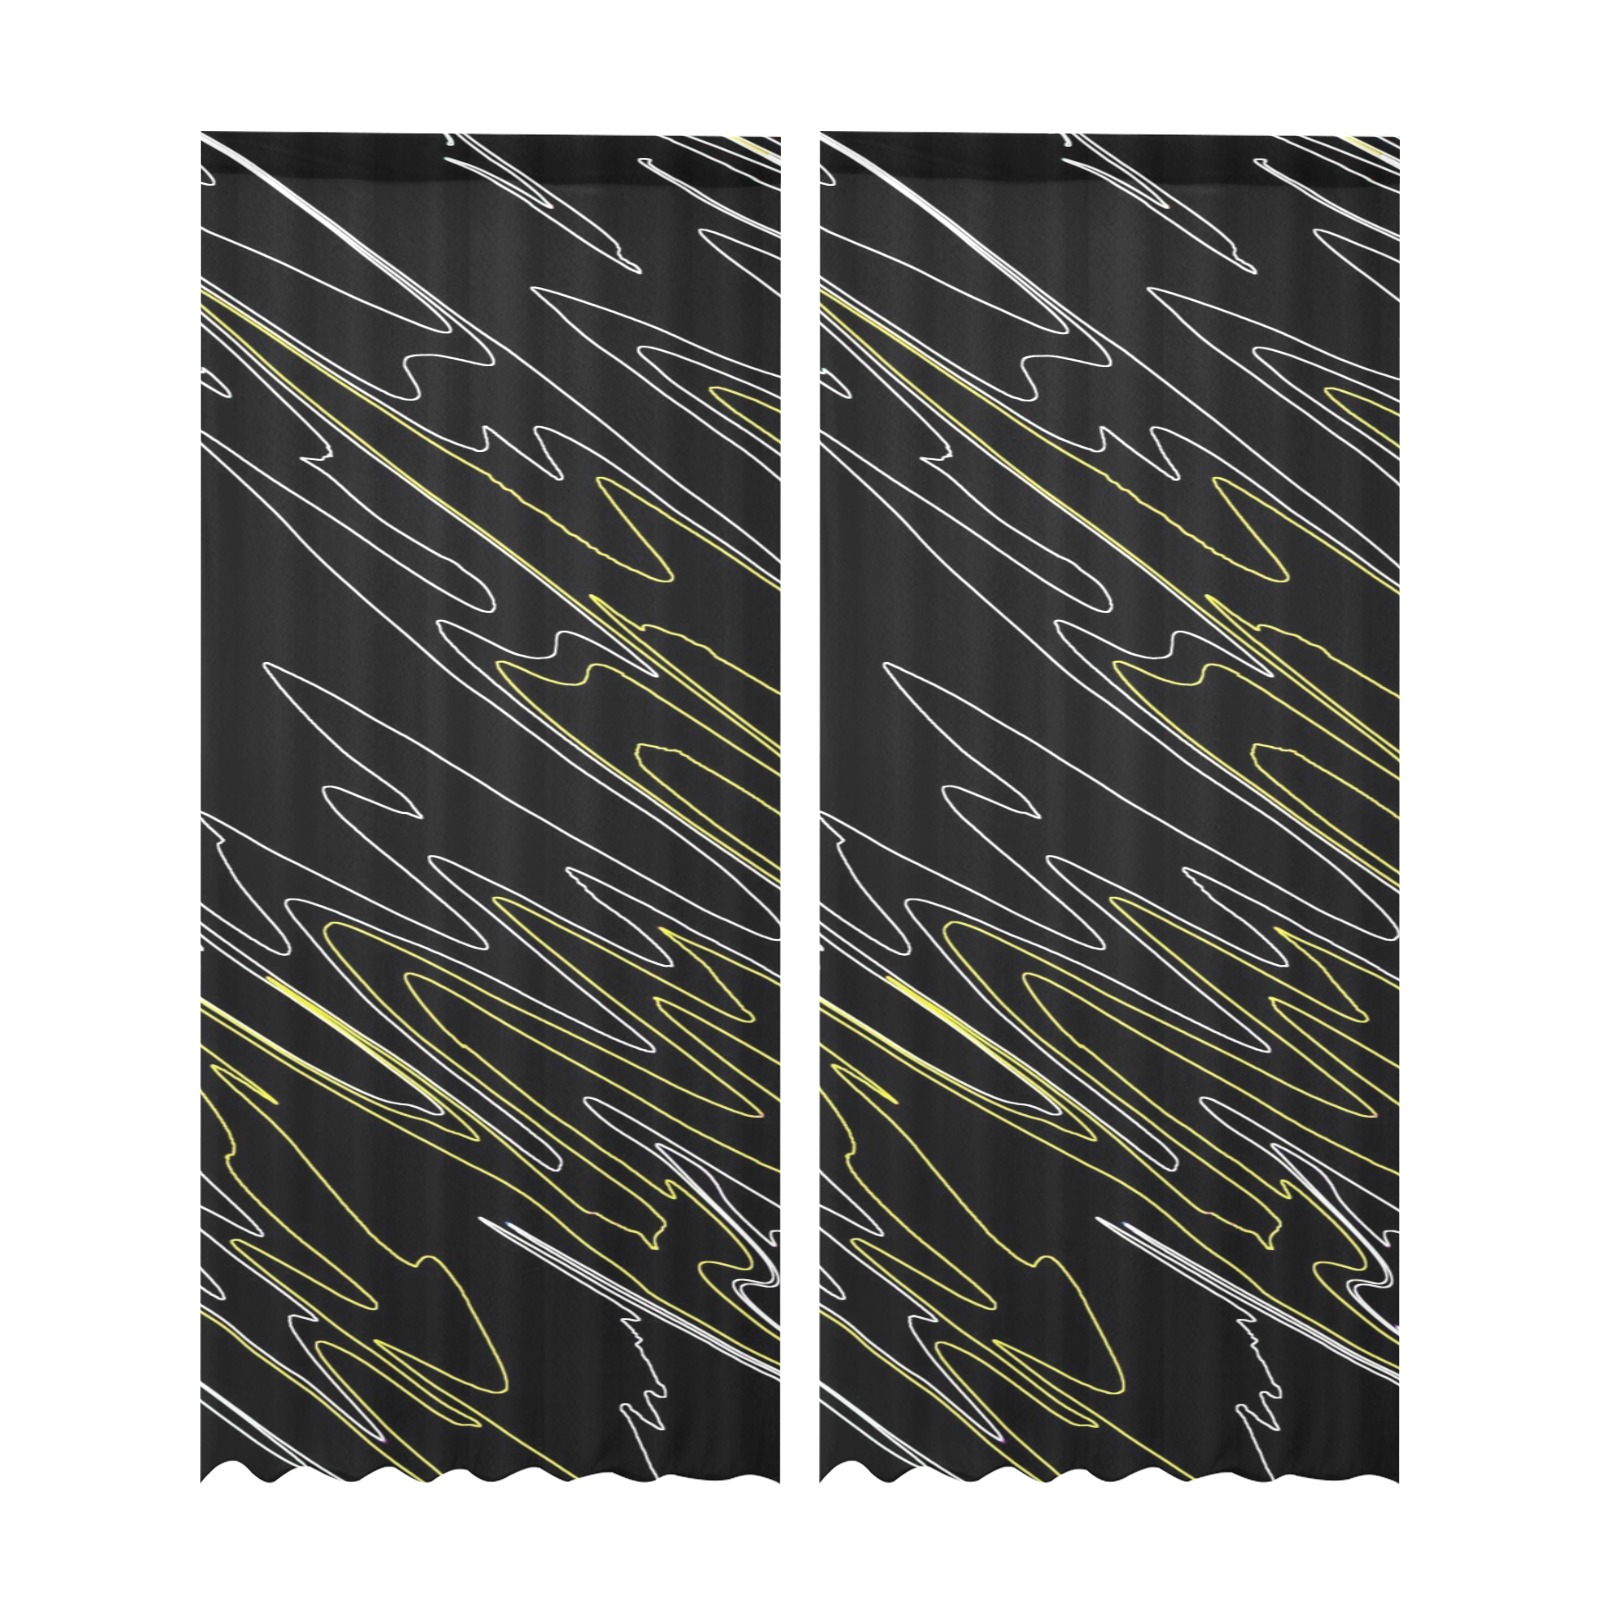 Marbled Black Yellow Gauze Curtain 28"x95" (Two-Piece)